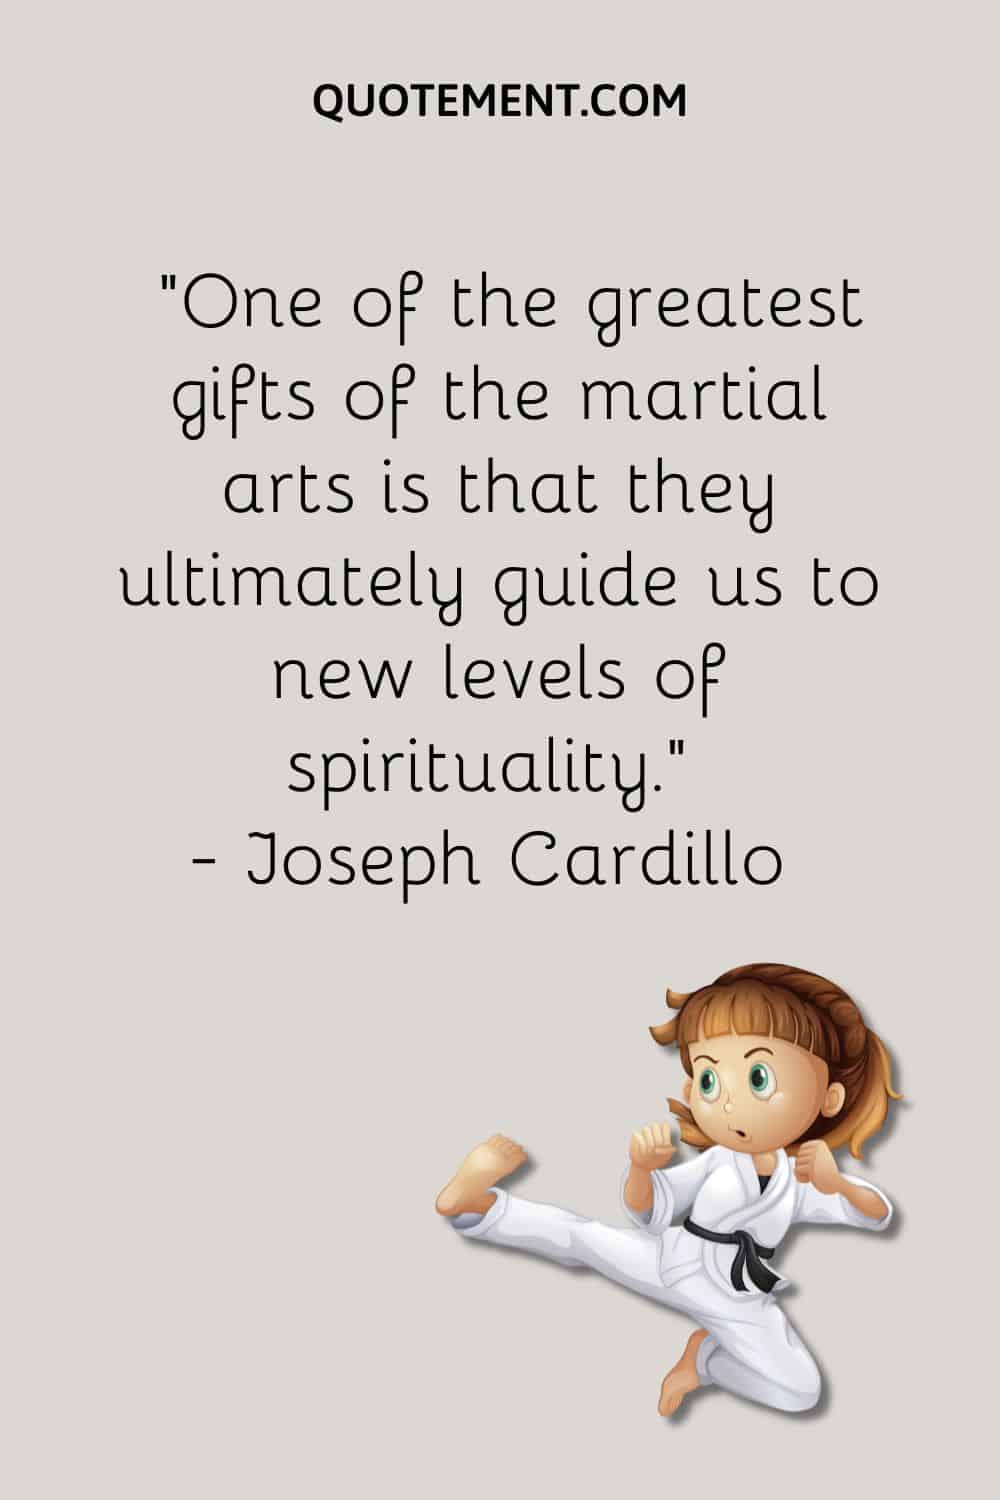 One of the greatest gifts of the martial arts is that they ultimately guide us to new levels of spirituality